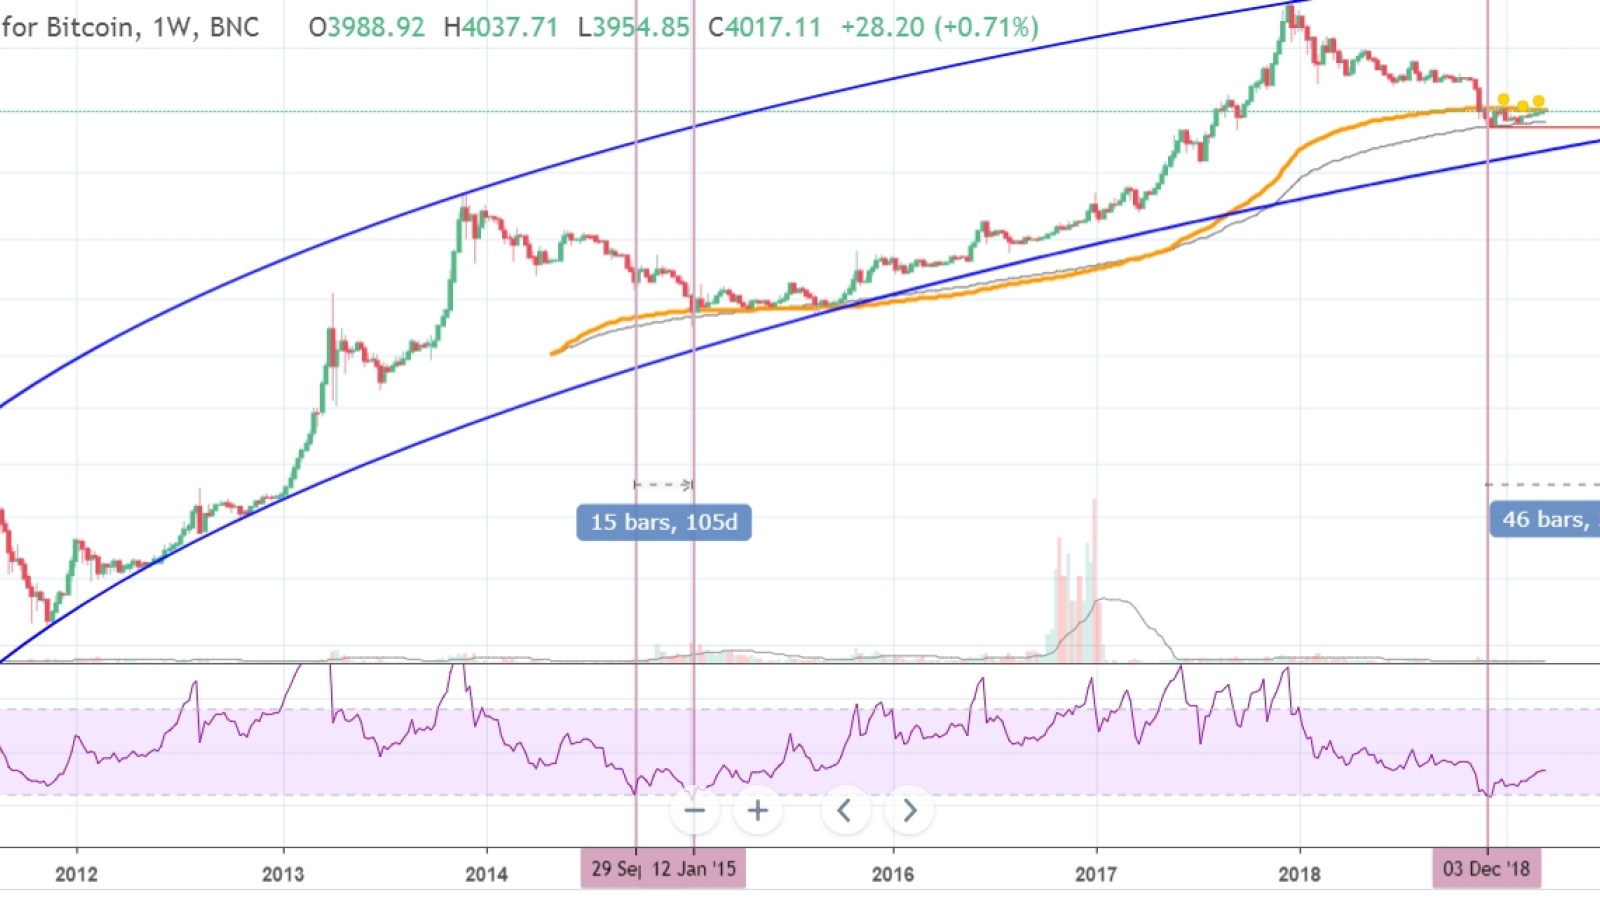 BTC will keep in the channel between $3,000 and $4,500 in 2019